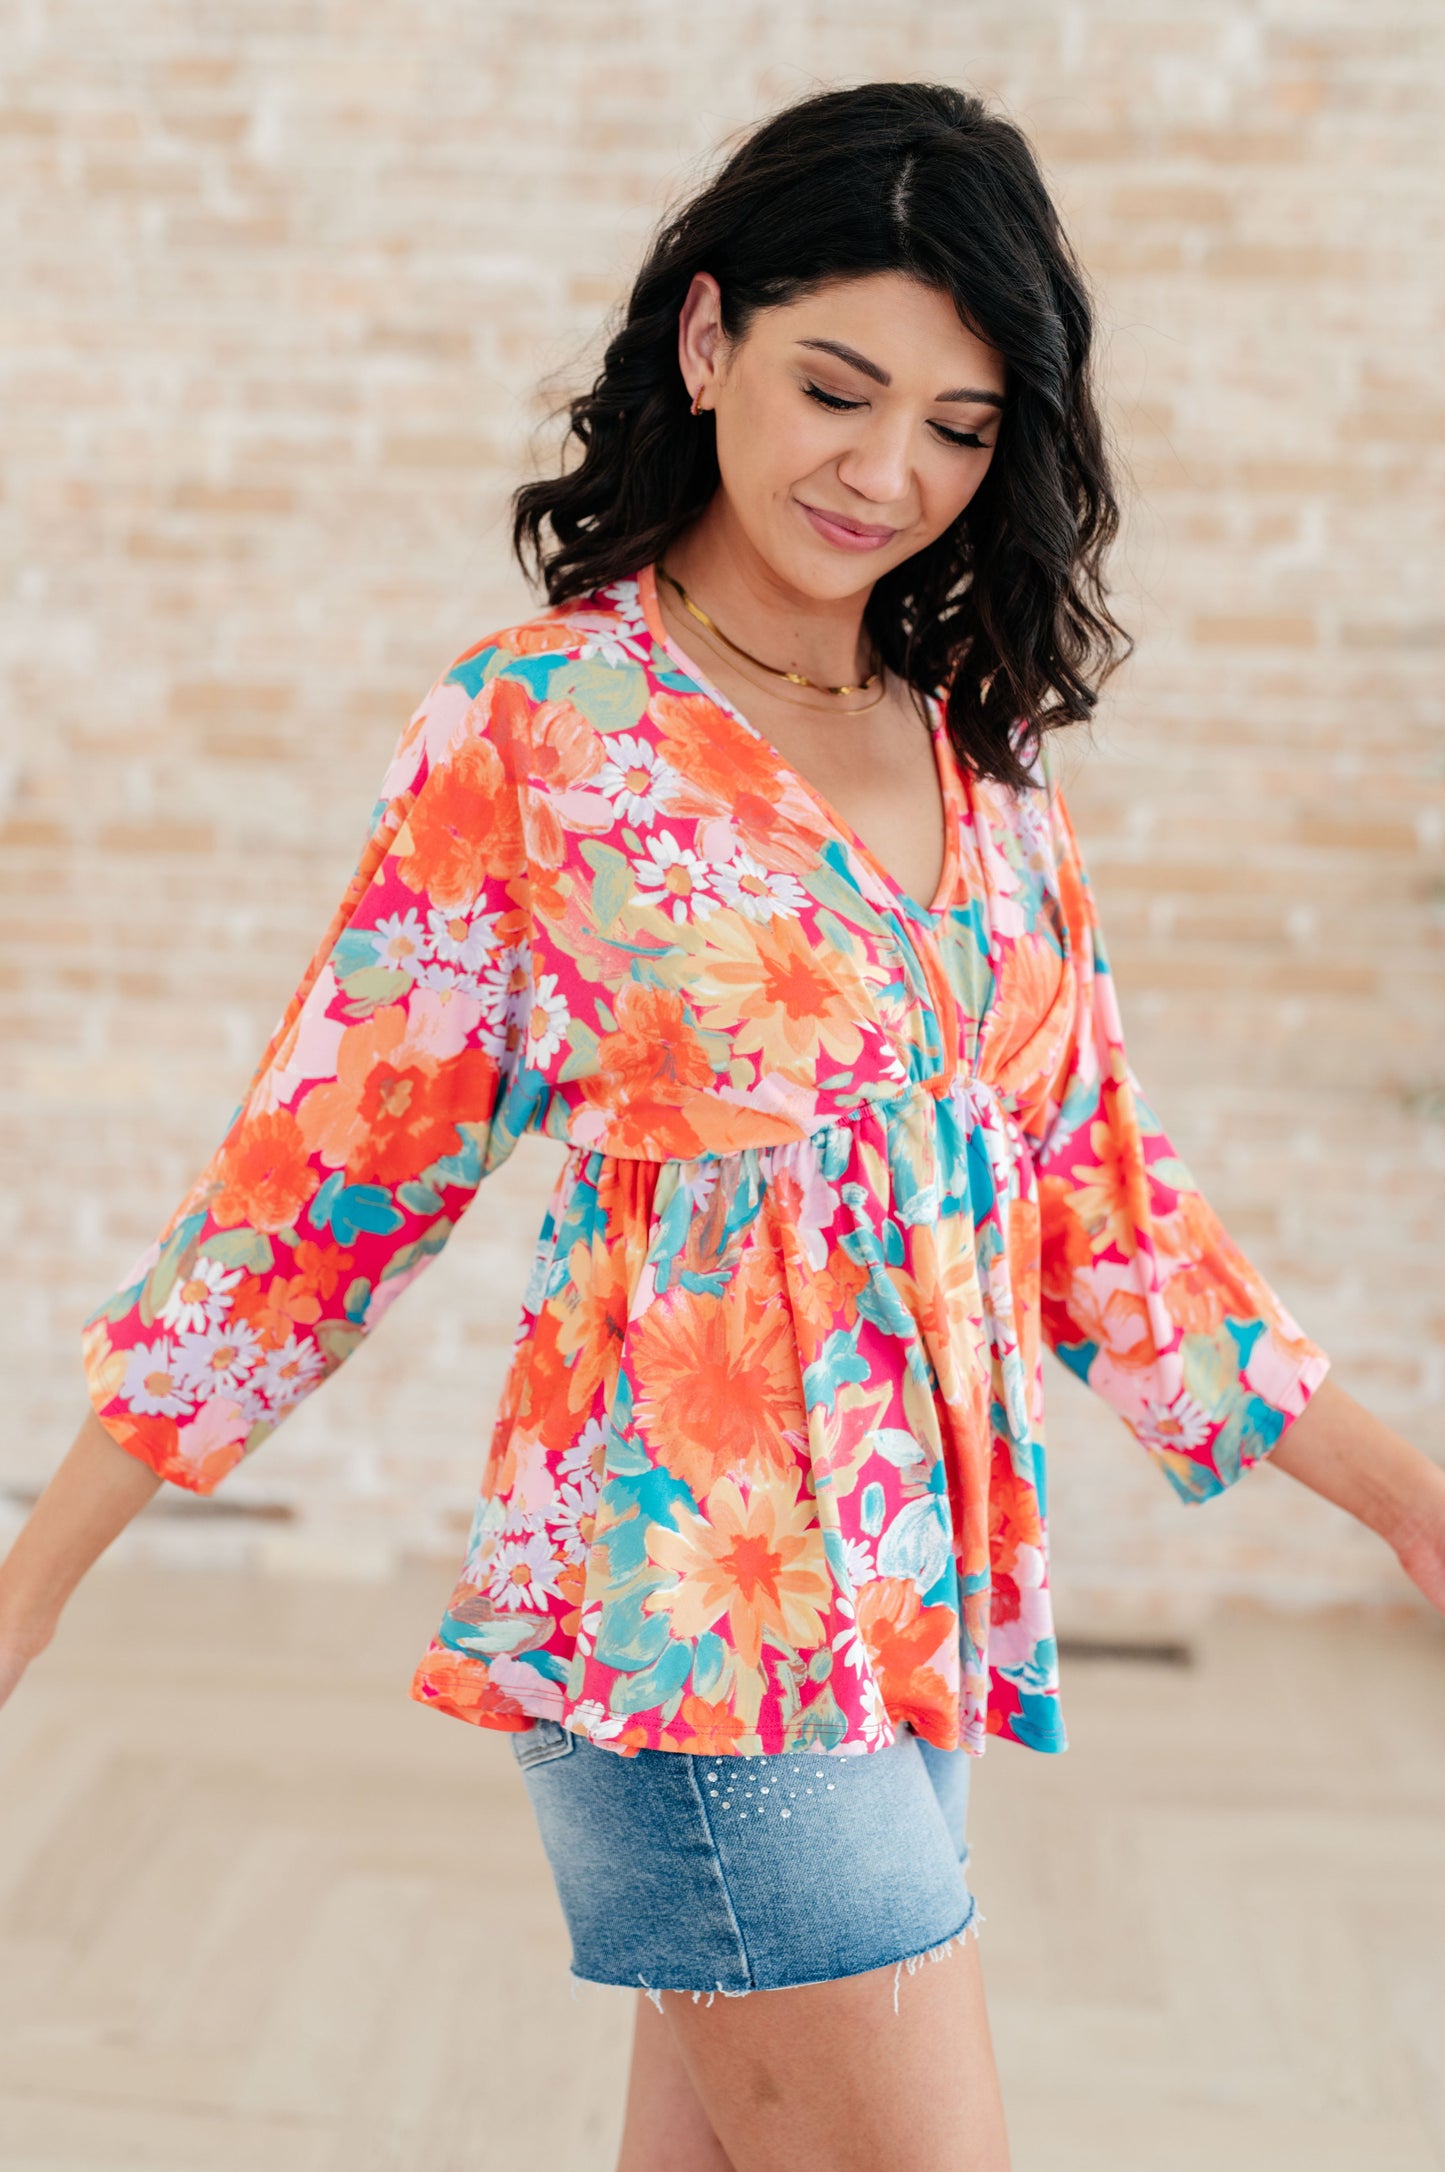 In Other Words, Hold My Hand V-Neck Blouse - Southern Divas Boutique